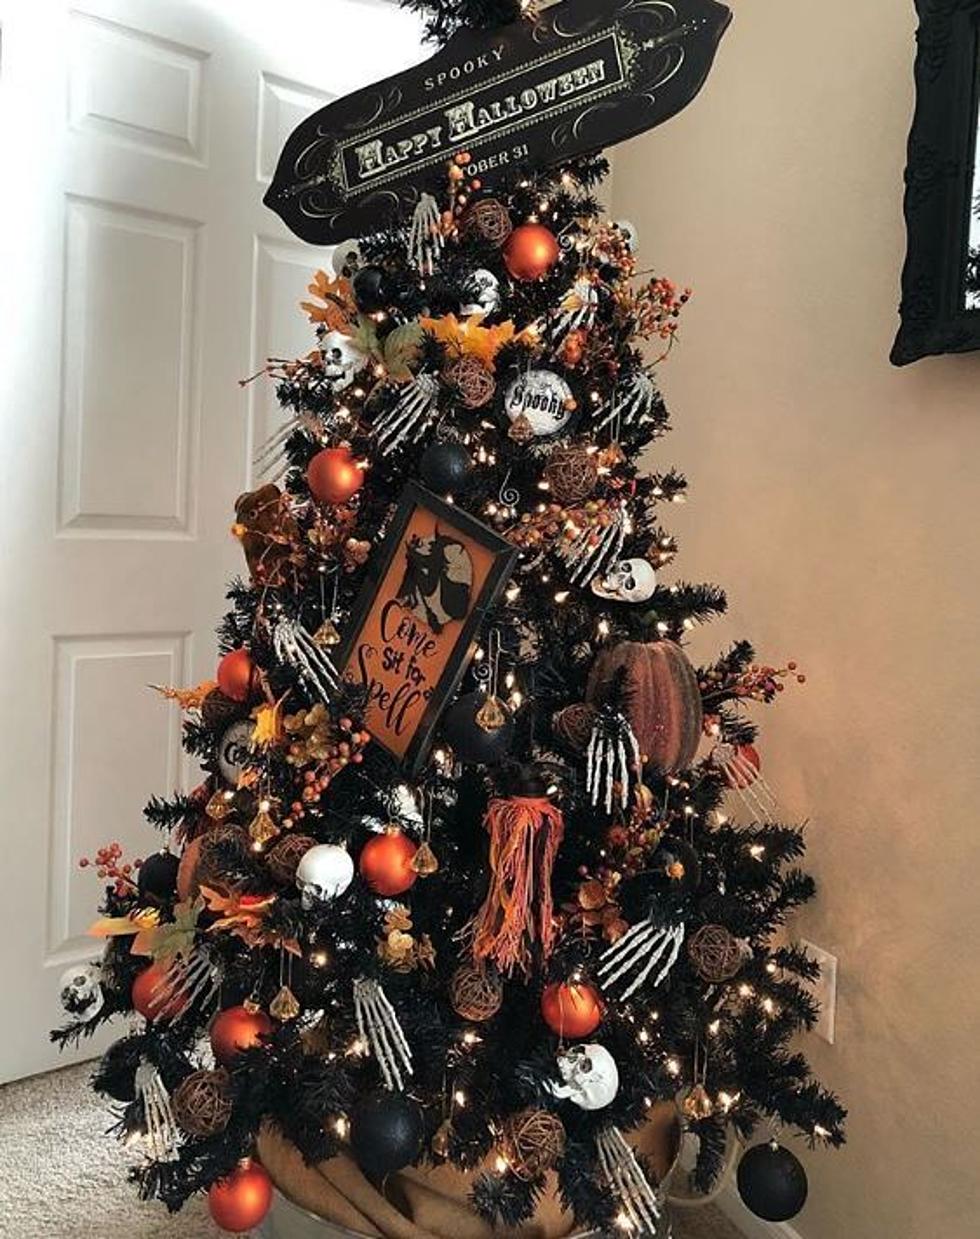 Only In 2020 – A Halloween/Thanksgiving/Christmas Tree?!?